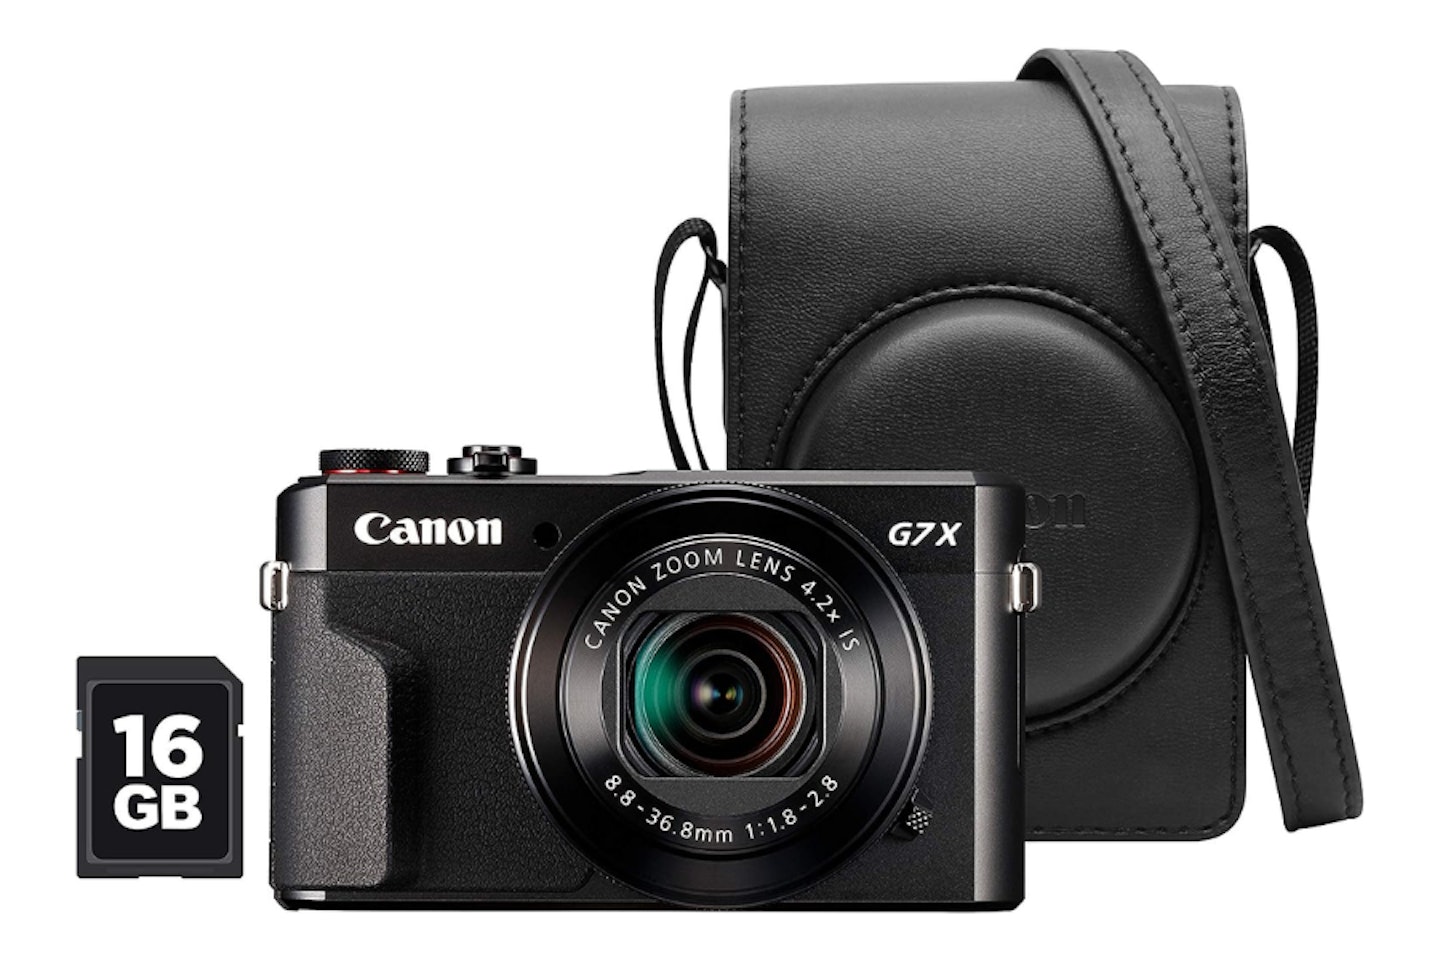 Canon Powershot G7 X Mark II Digital Camera - one of the best point and shoot cameras